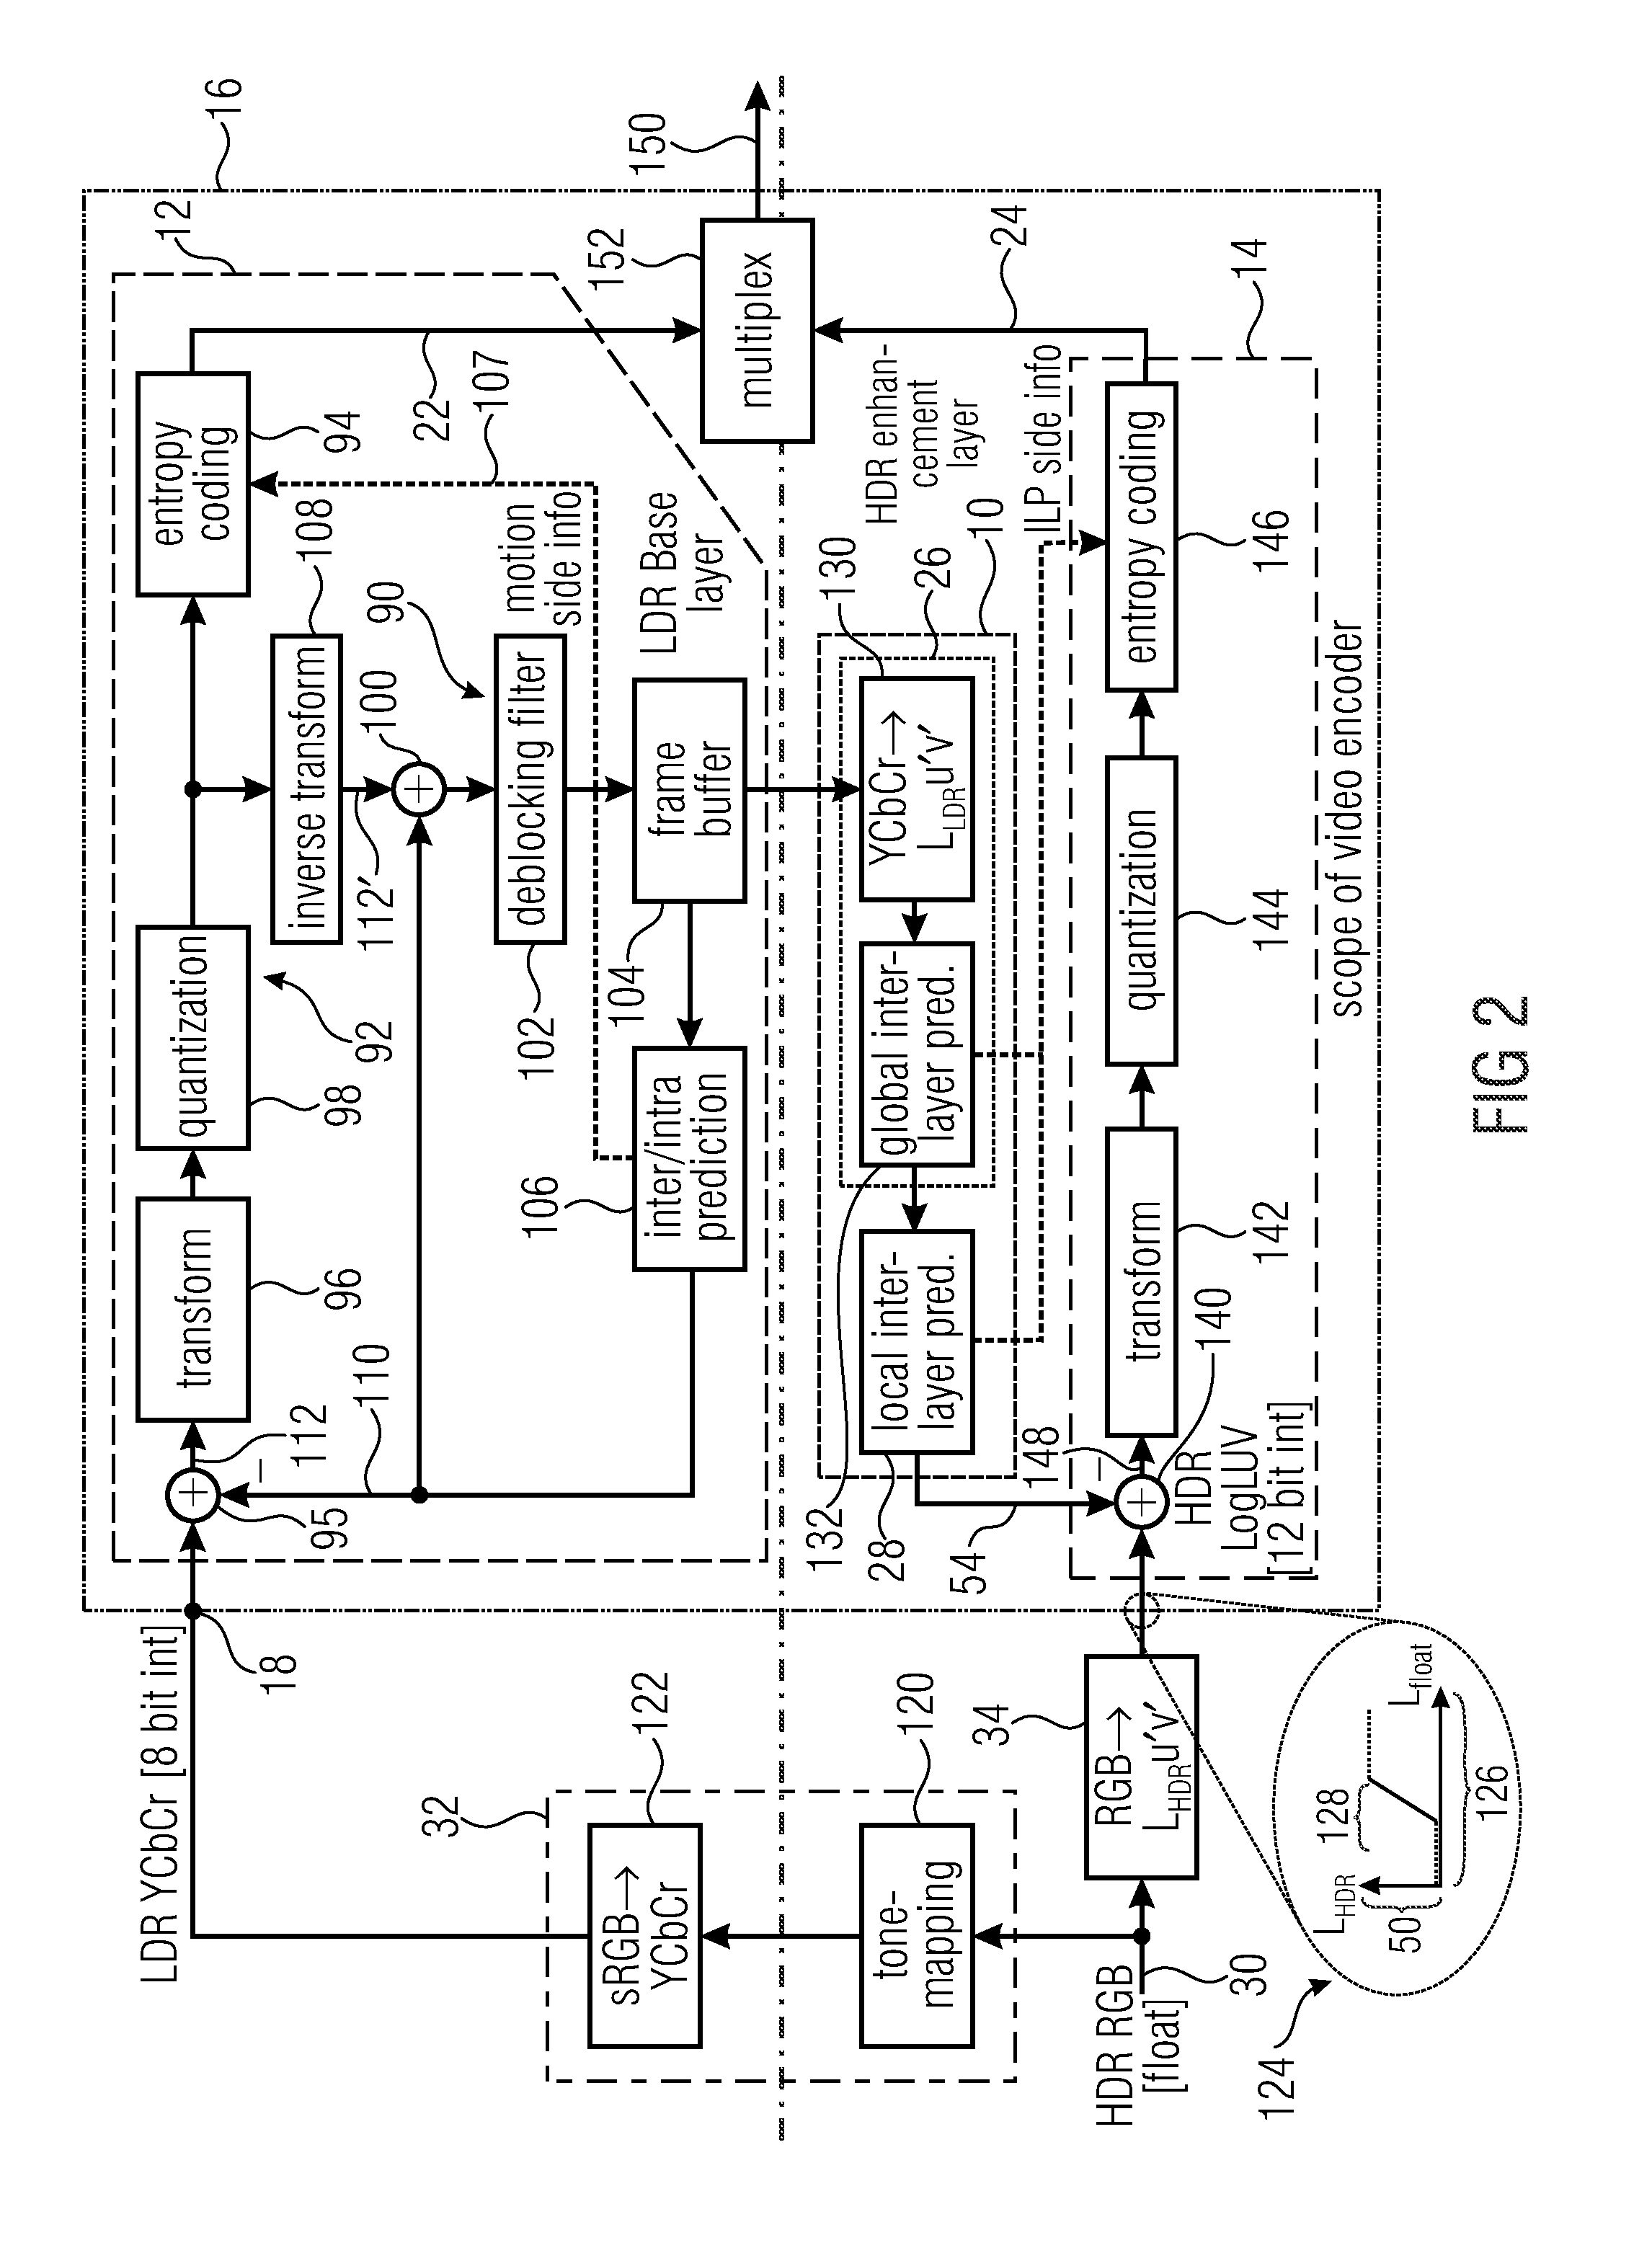 Inter-layer prediction between layers of different dynamic sample value range